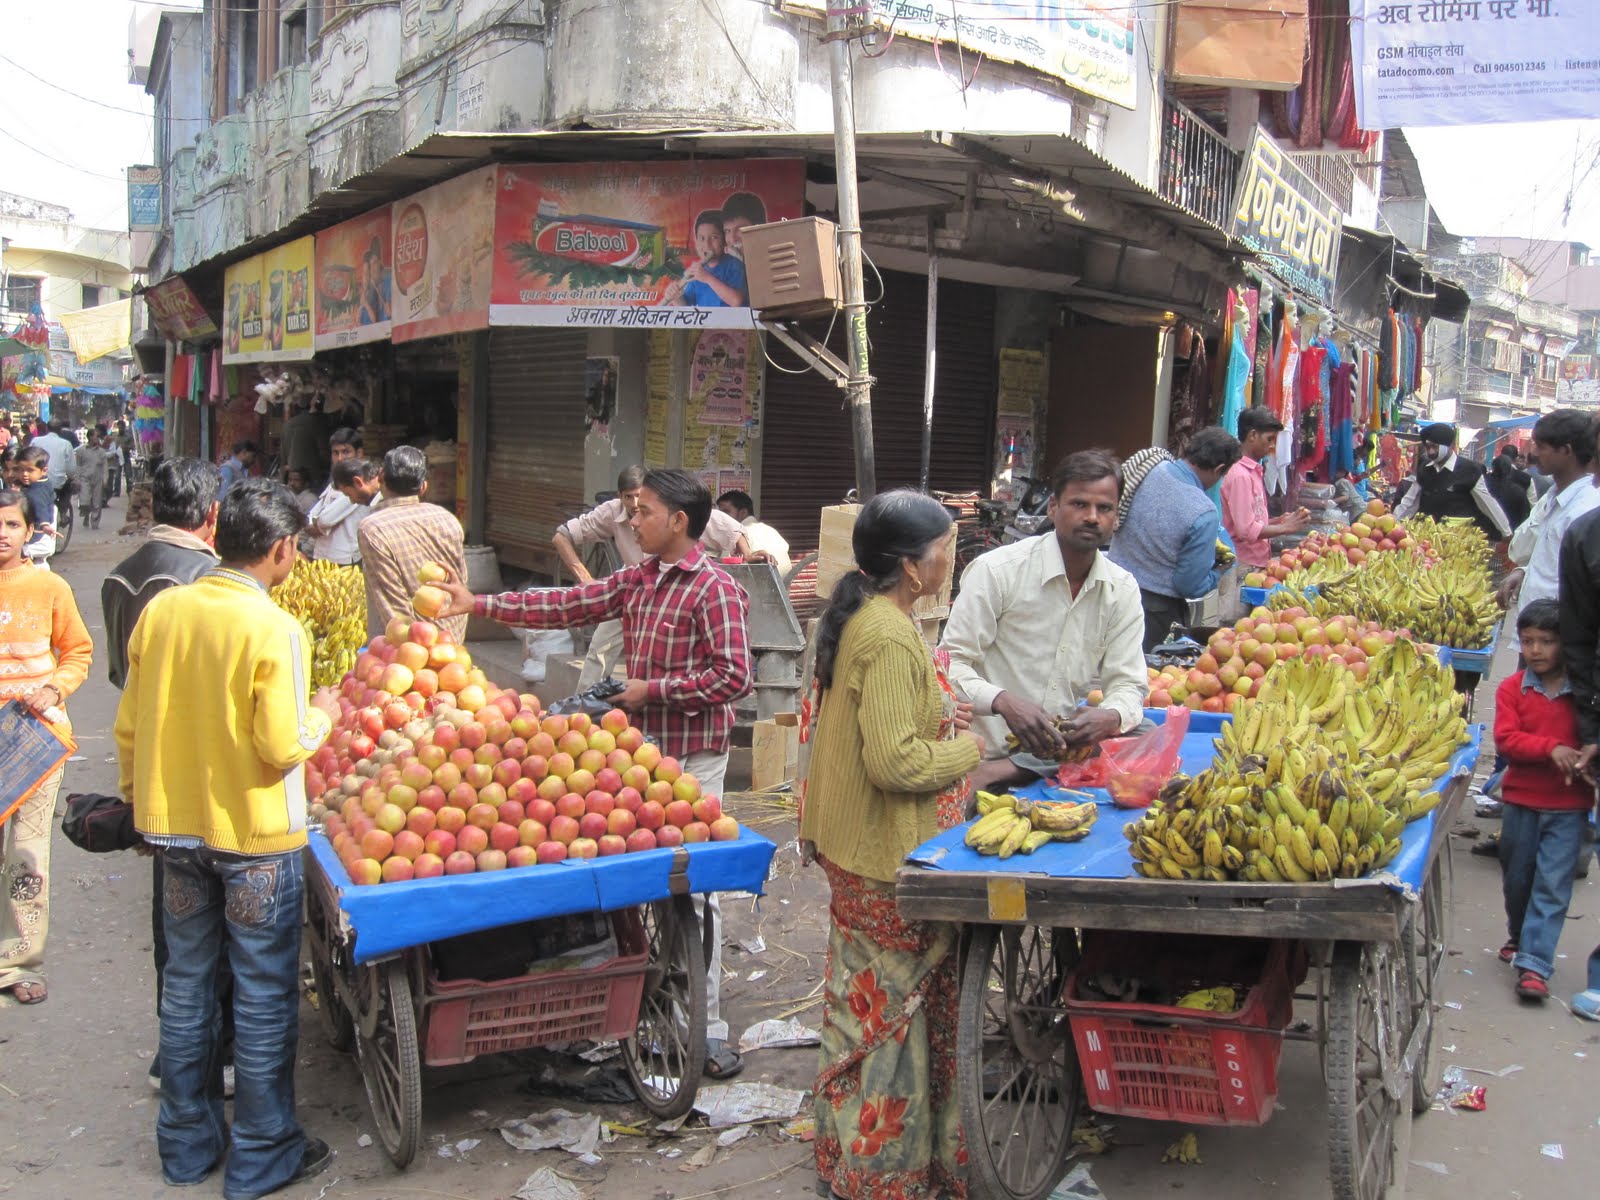 Informal workers in India, Africa, LatAm, Asia represents half of non-agricultural GDP: Report